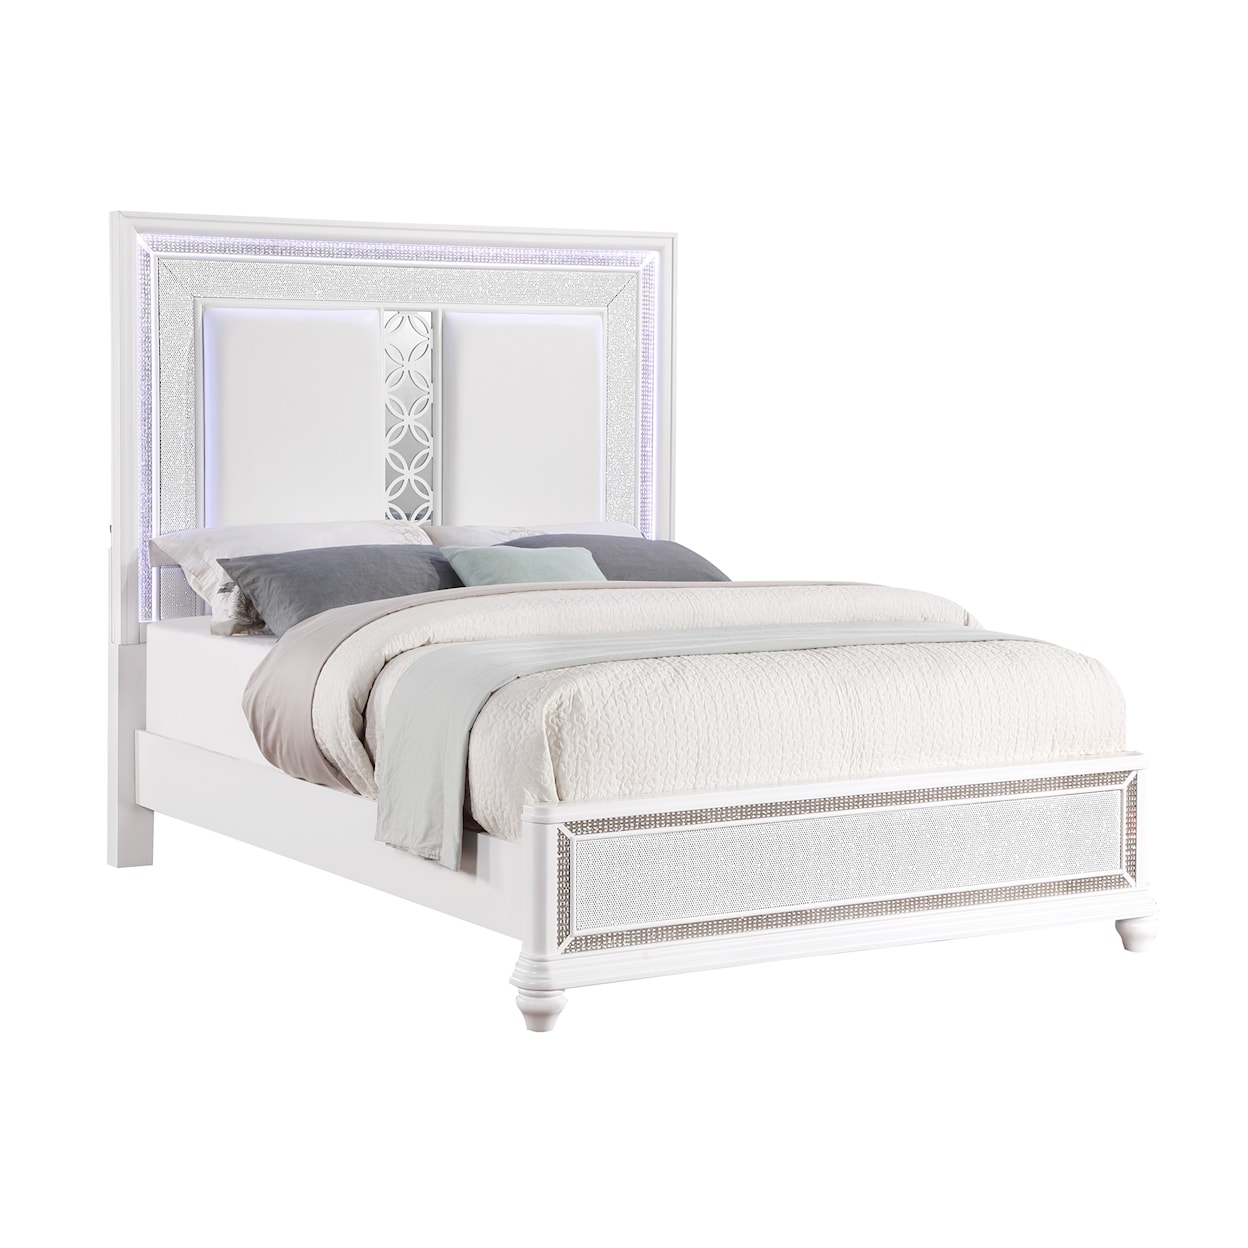 Holland House Glamour Queen Bed